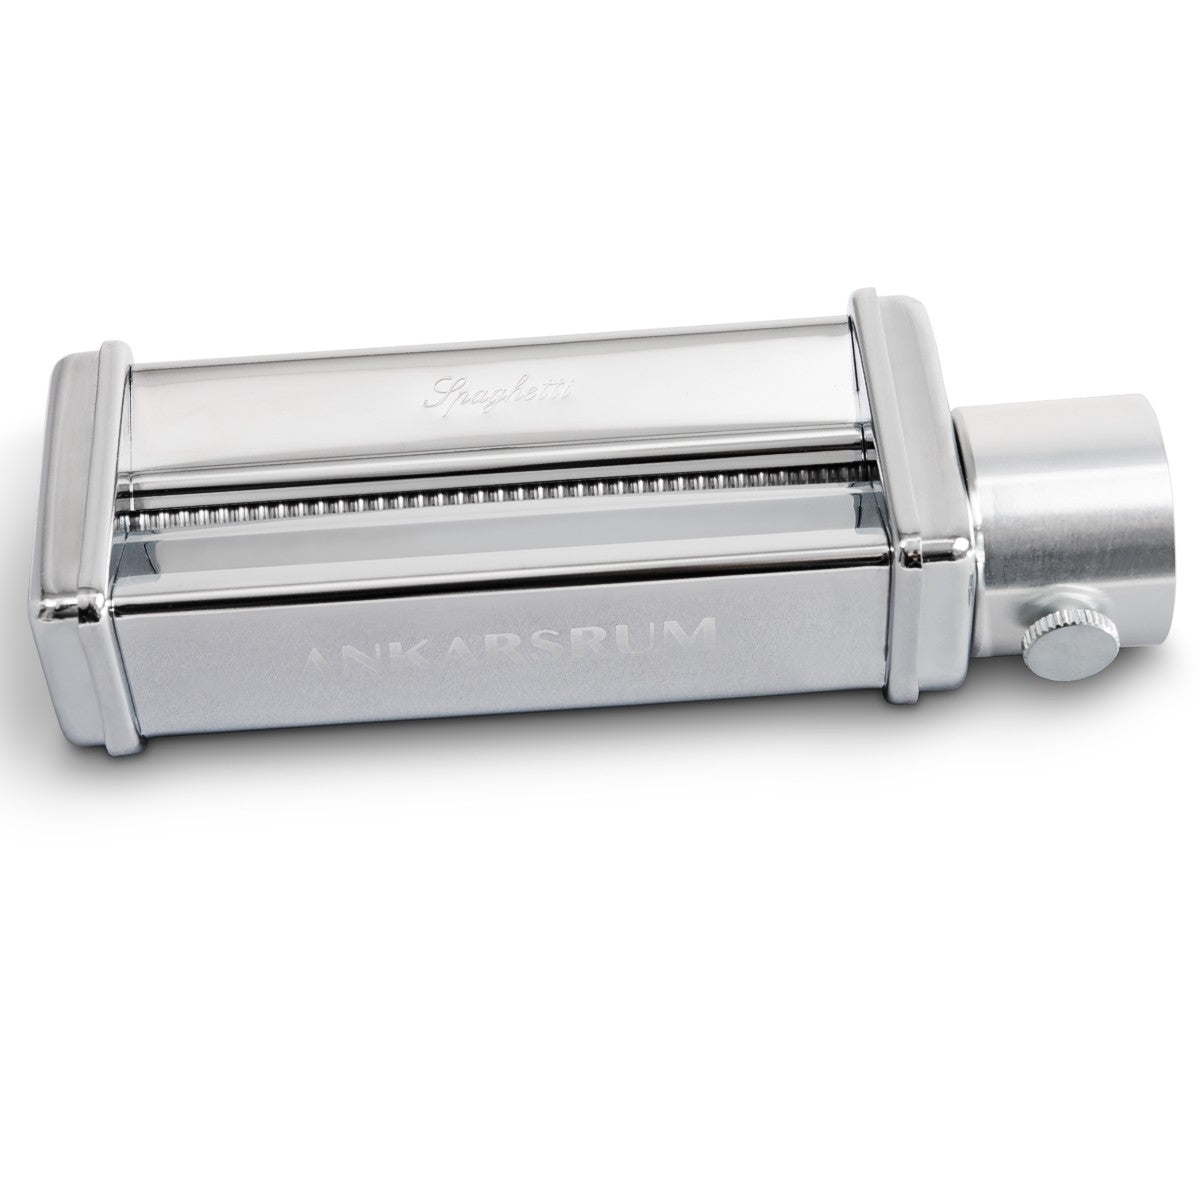 Norpro Pasta/ Pastry Cutter